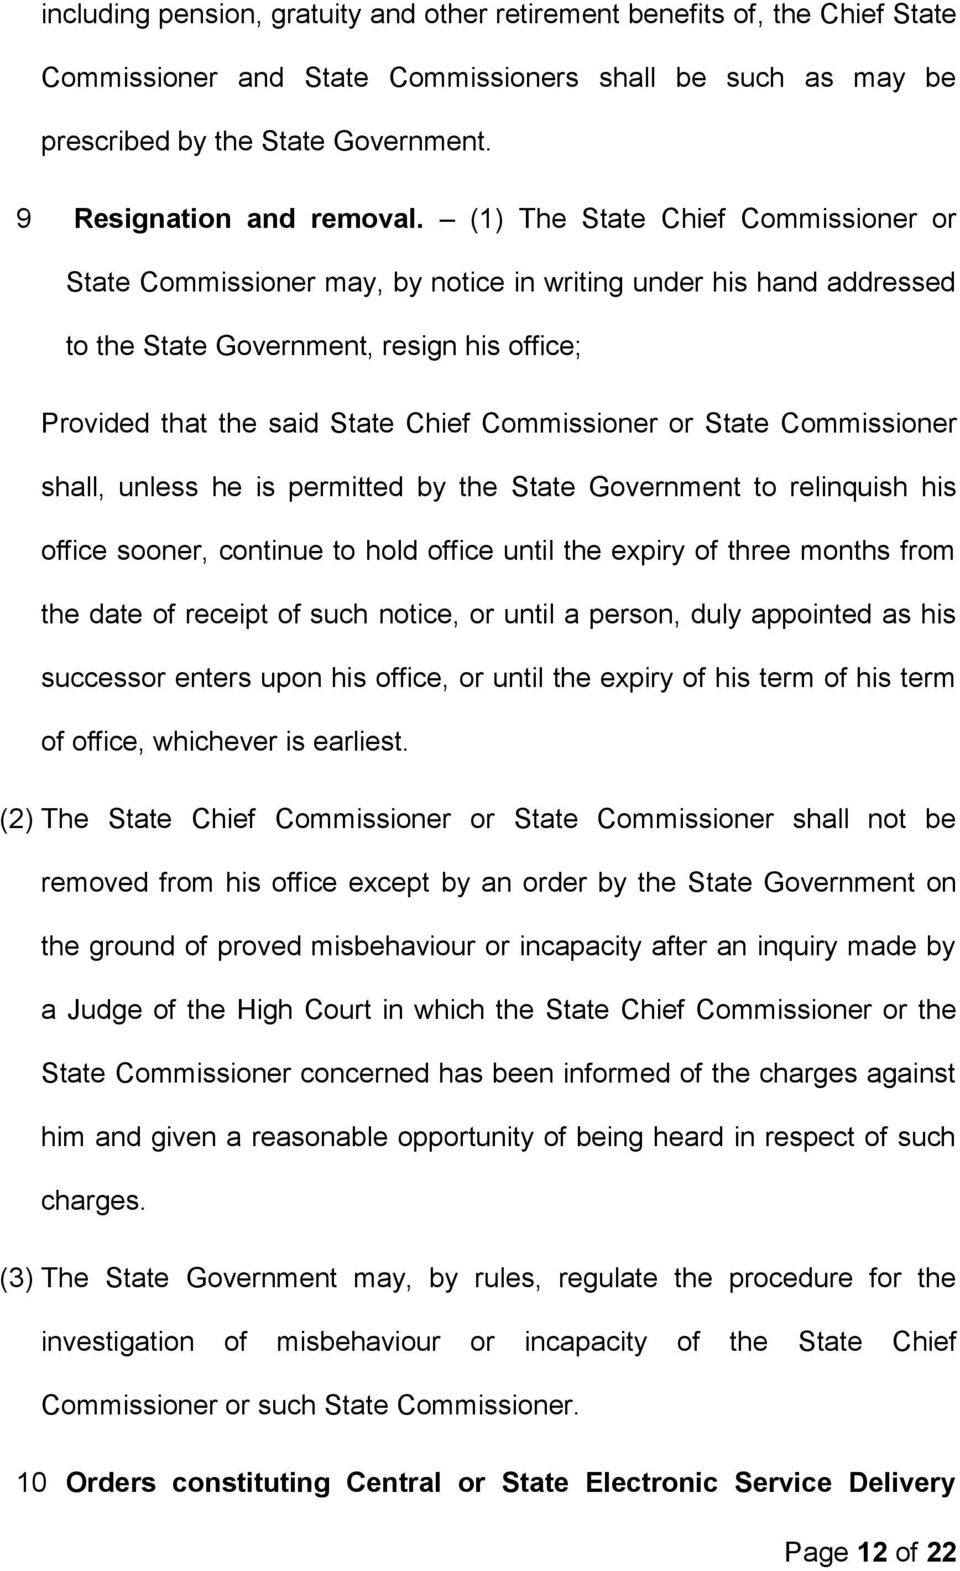 (1) The State Chief Commissioner or State Commissioner may, by notice in writing under his hand addressed to the State Government, resign his office; Provided that the said State Chief Commissioner